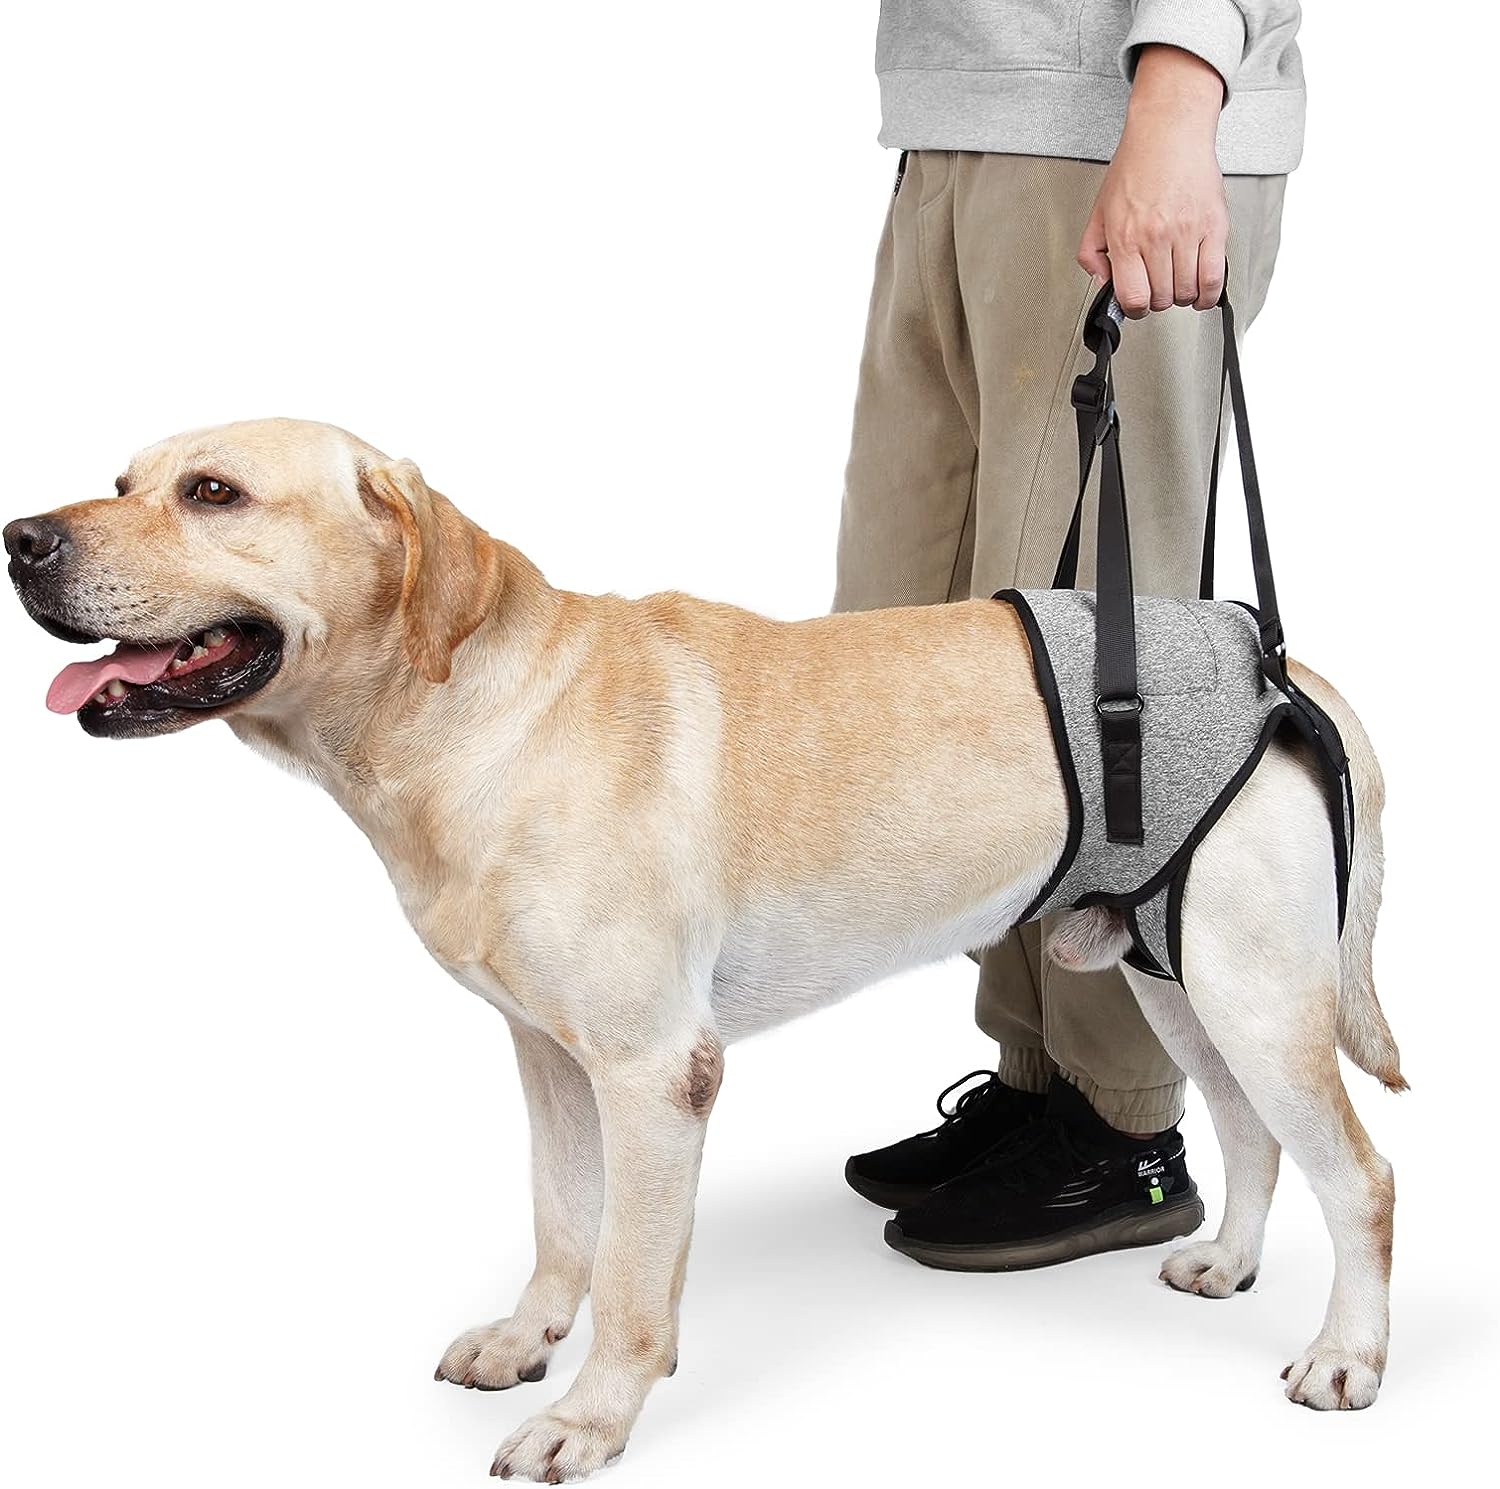 KUTKUT Dog Sling for Medium Dogs Hind Leg Support to Help Rehabilitate The Hind Limbs of Elderly Dogs with Weak Hind Legs Disabilities and Injuries Dog Harness Helps Arthritis ACL Recovery-Harness-kutkutstyle